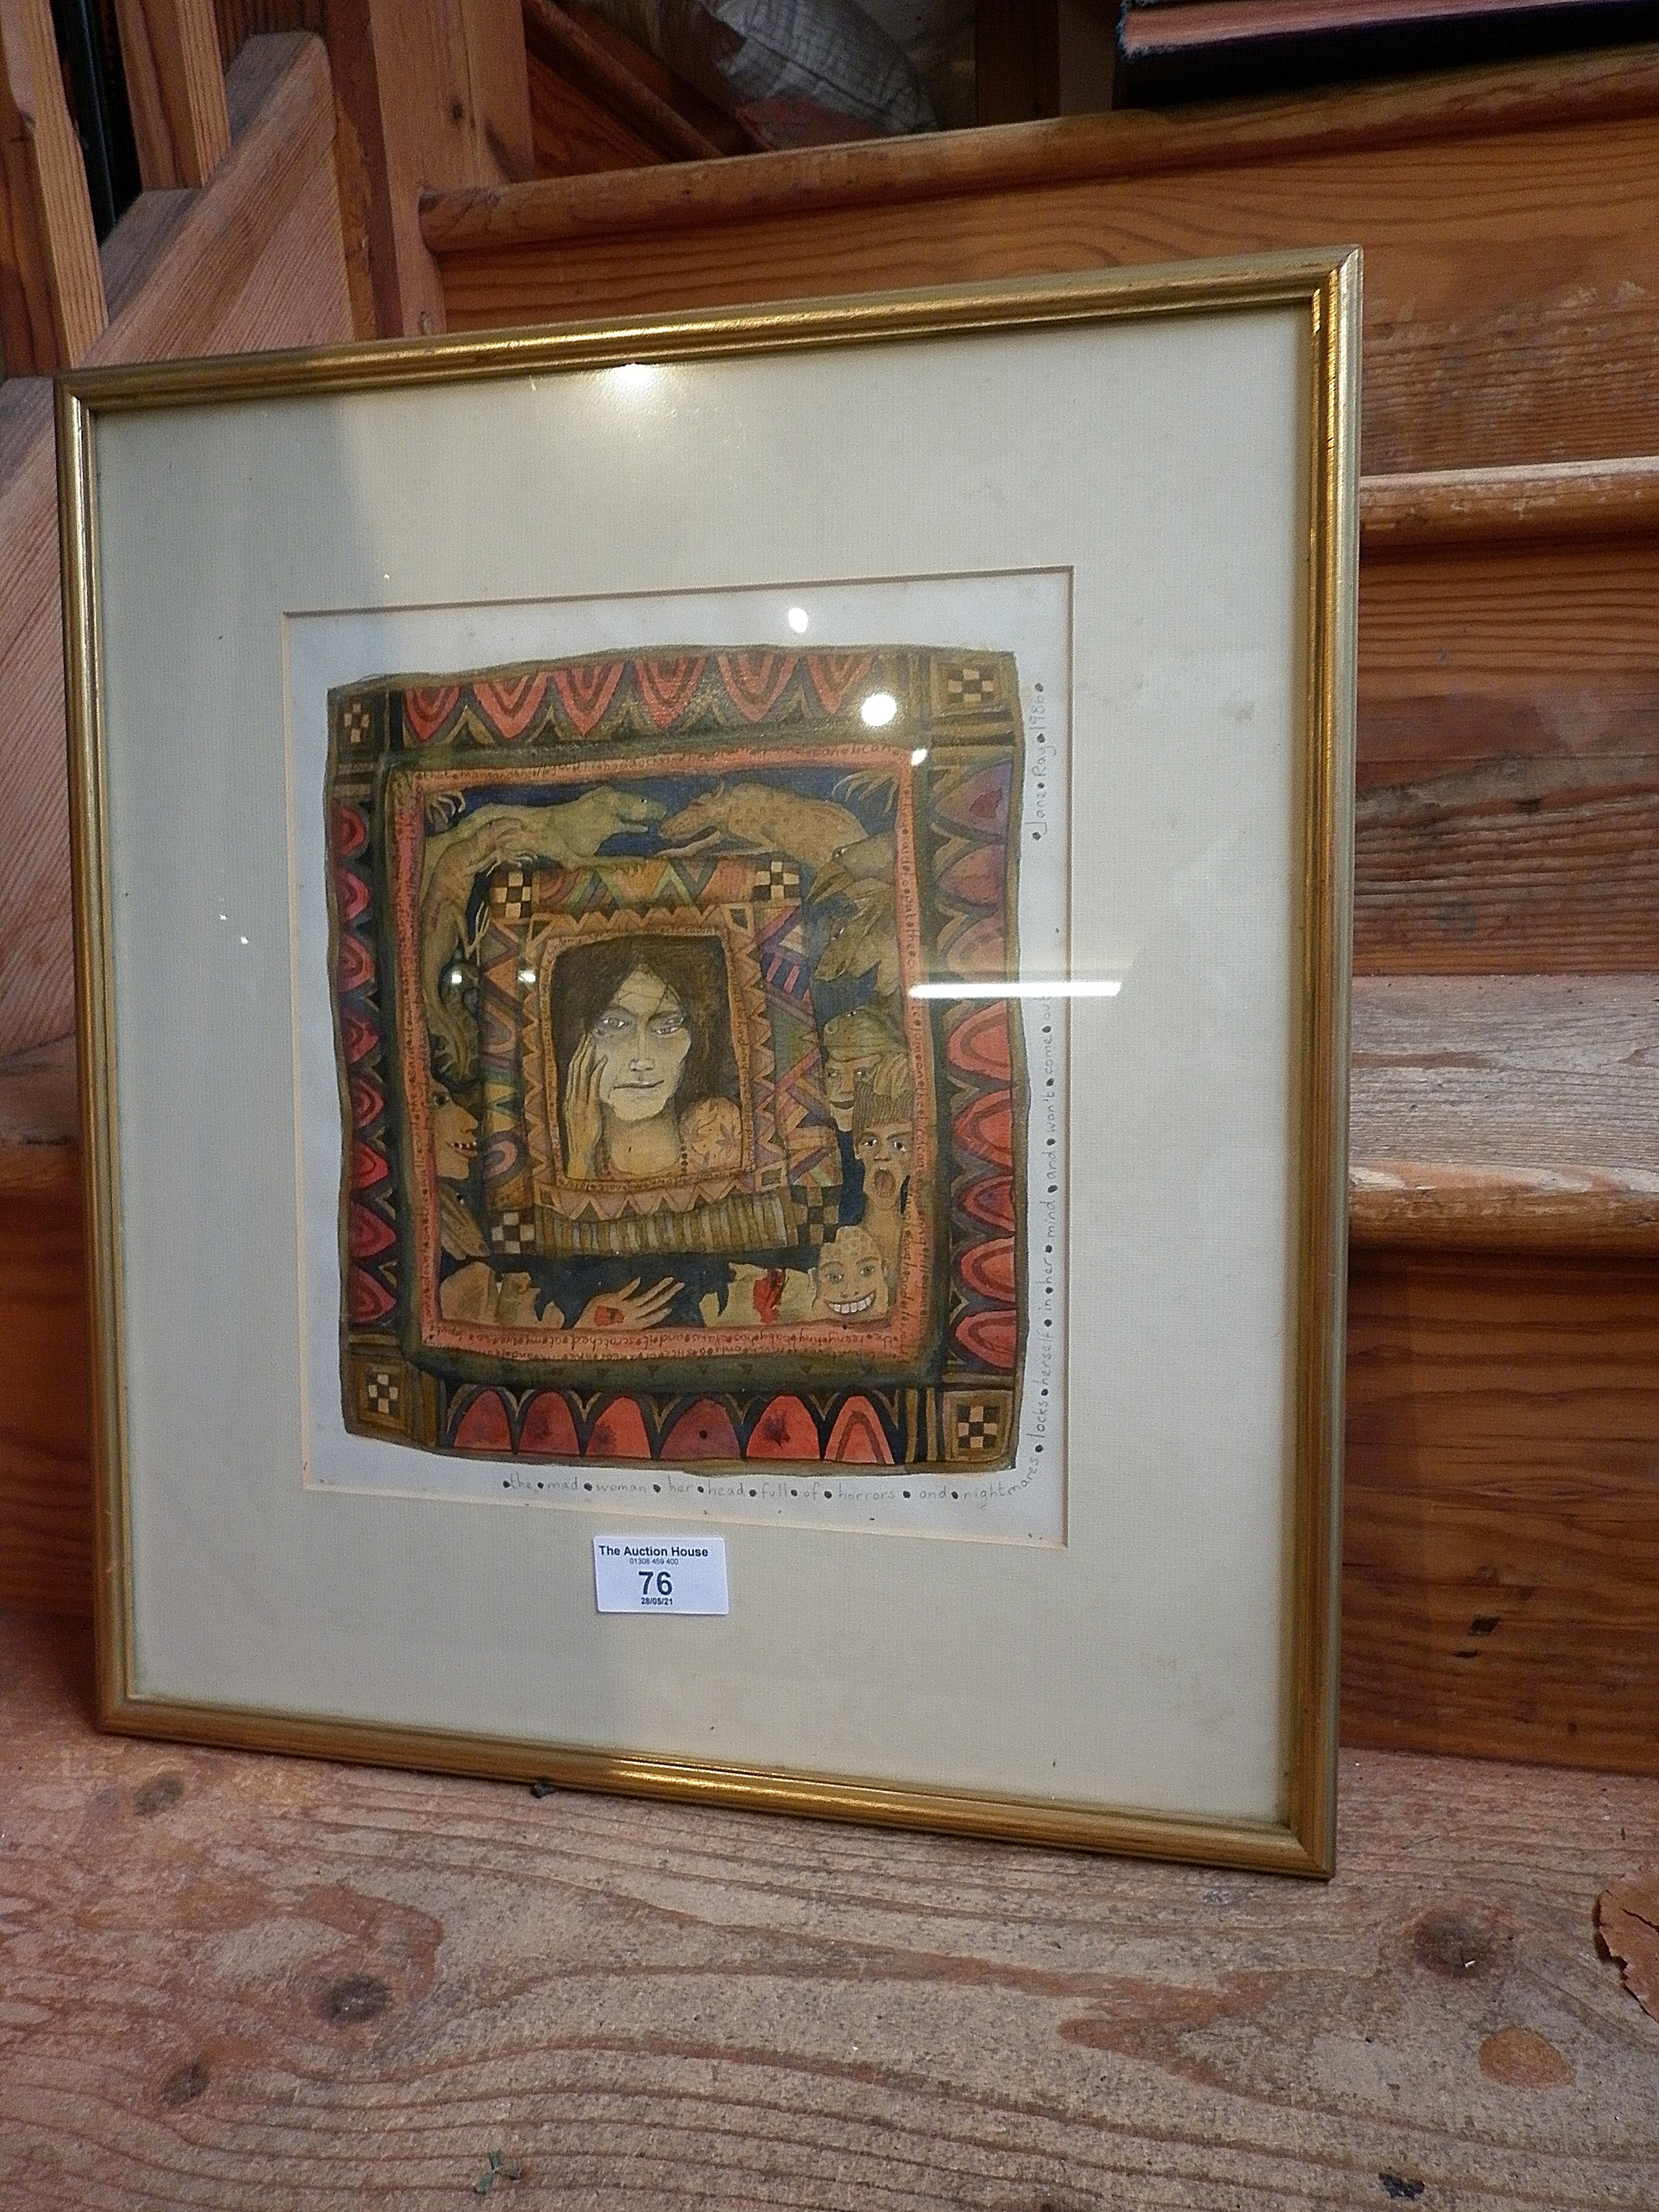 A watercolour by Jane RAY, signed and dated 1986 "the mad woman her head full of horrors and